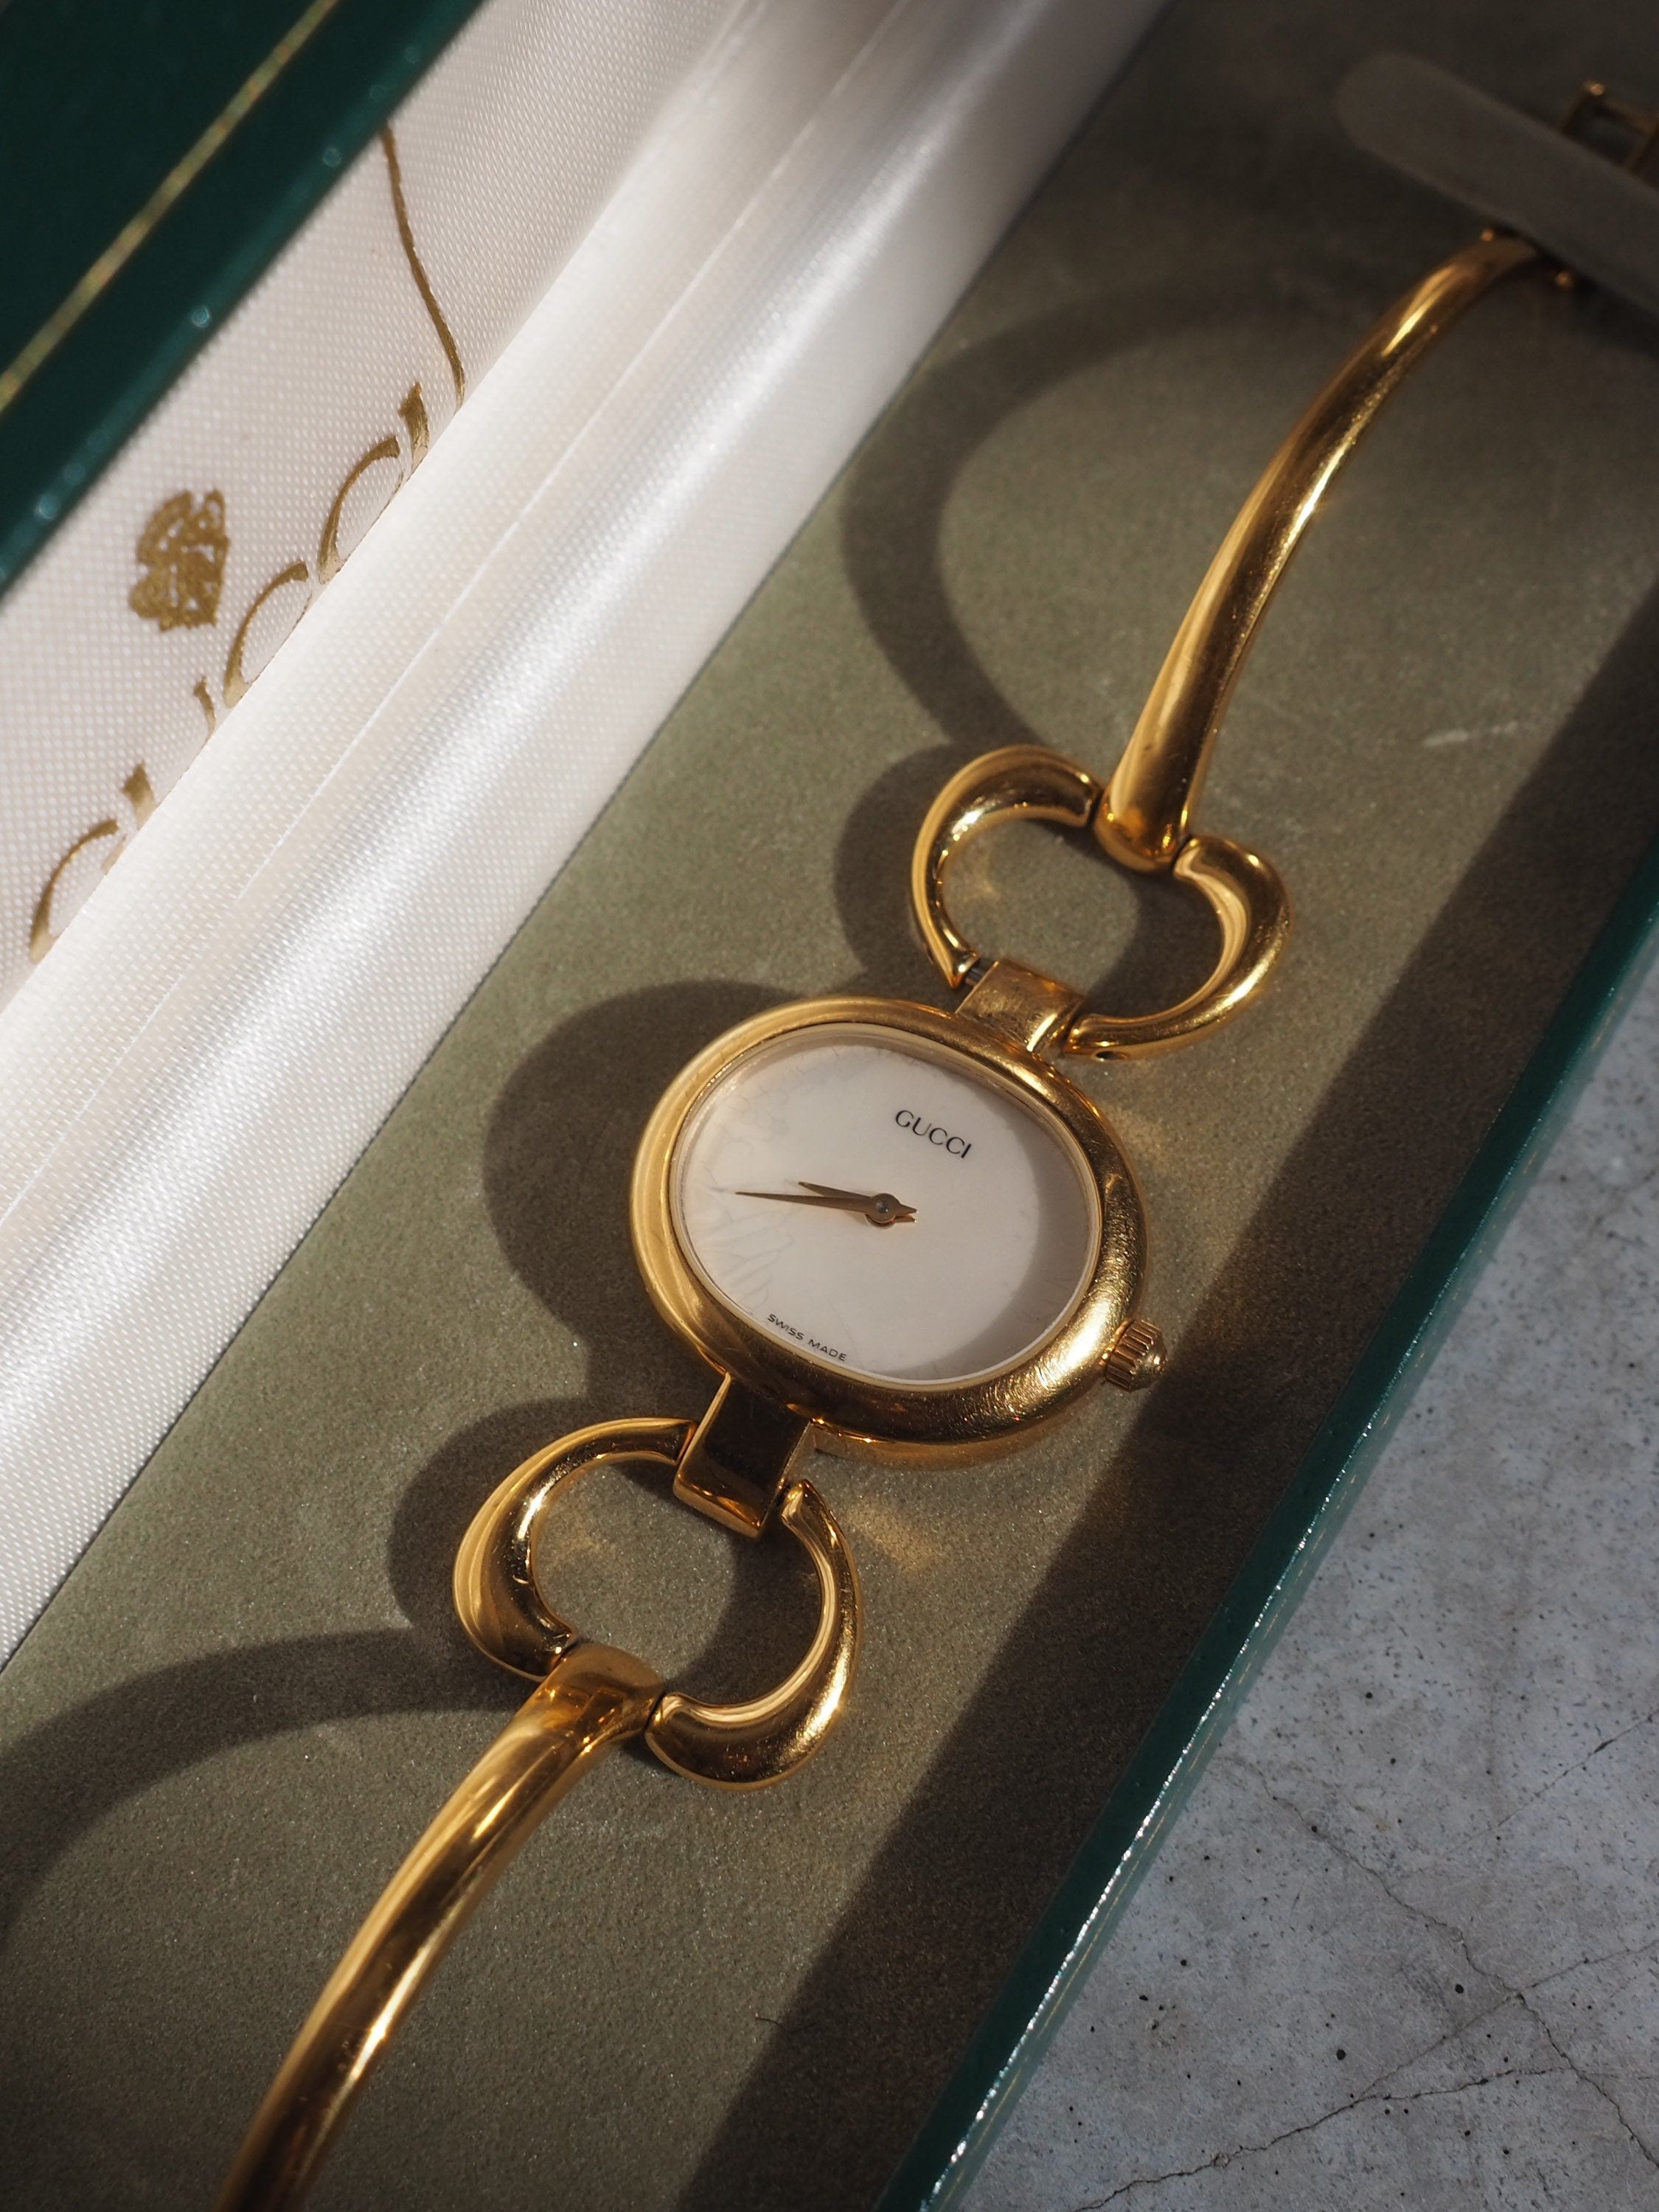 GUCCI Shell Bangle Watch Wristwatch Gold Metal Vintage Authentic